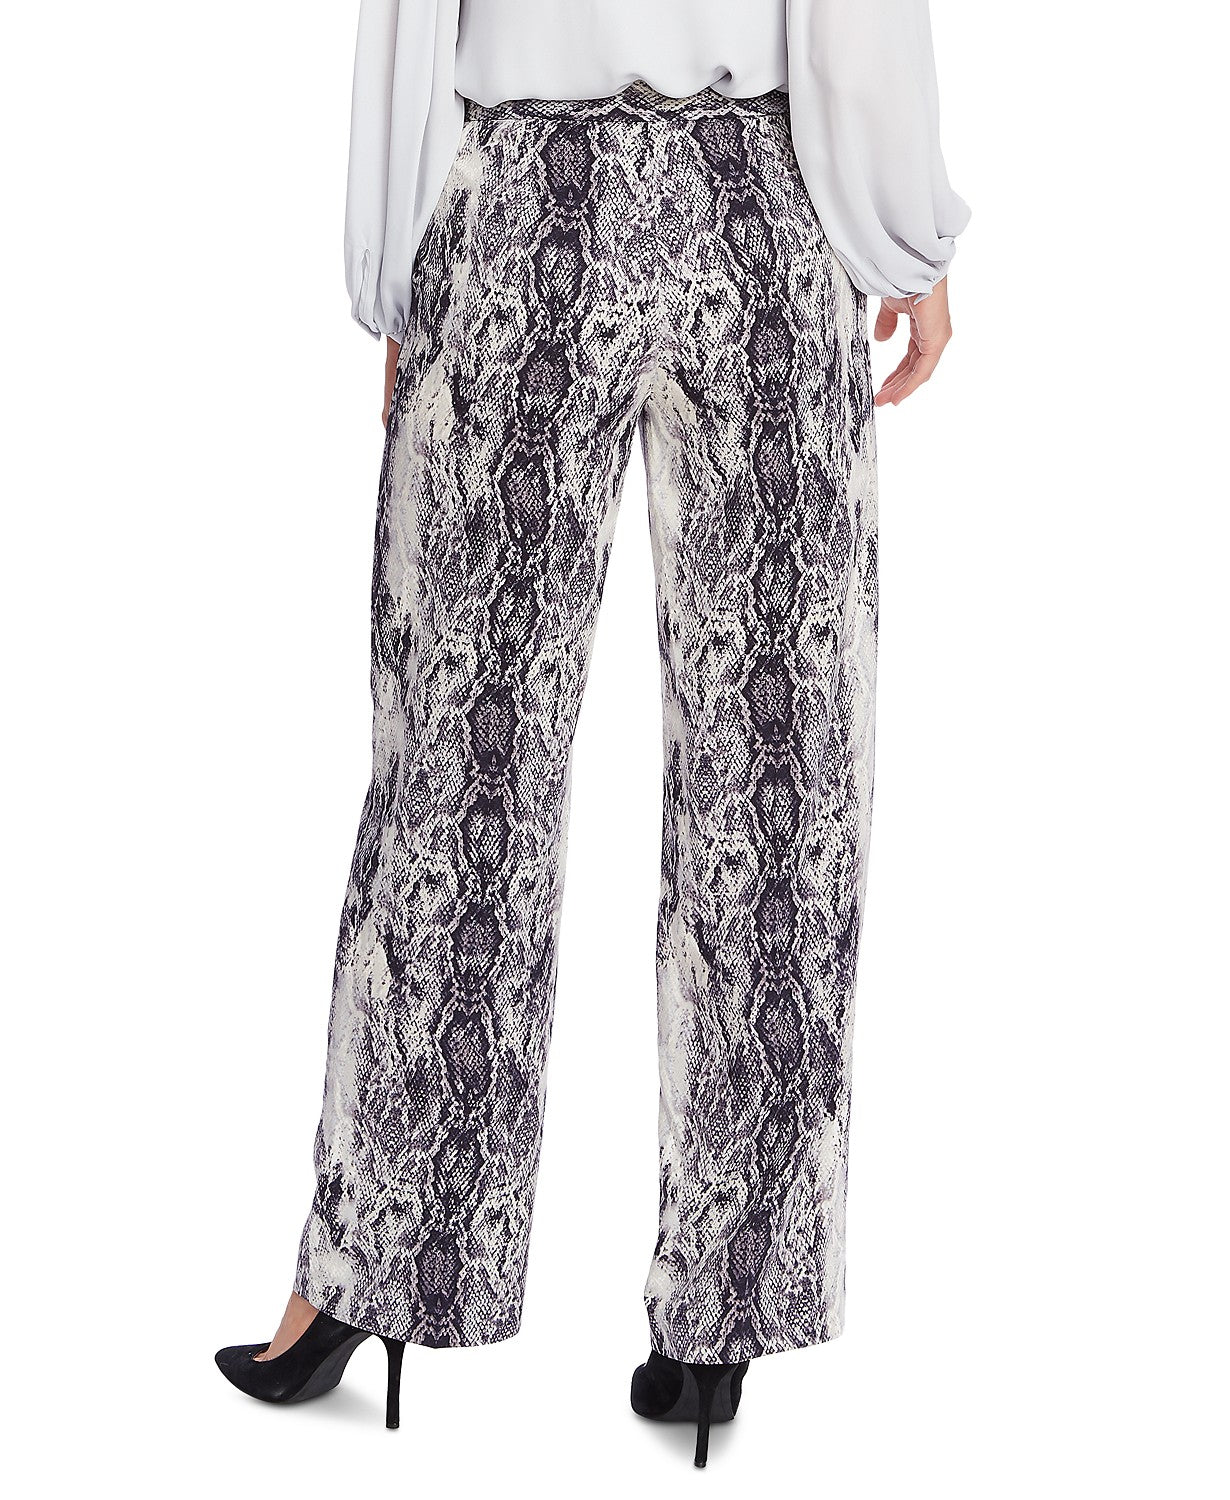 Women's Snake-Embossed Wide-Leg Pants by Vince Camuto